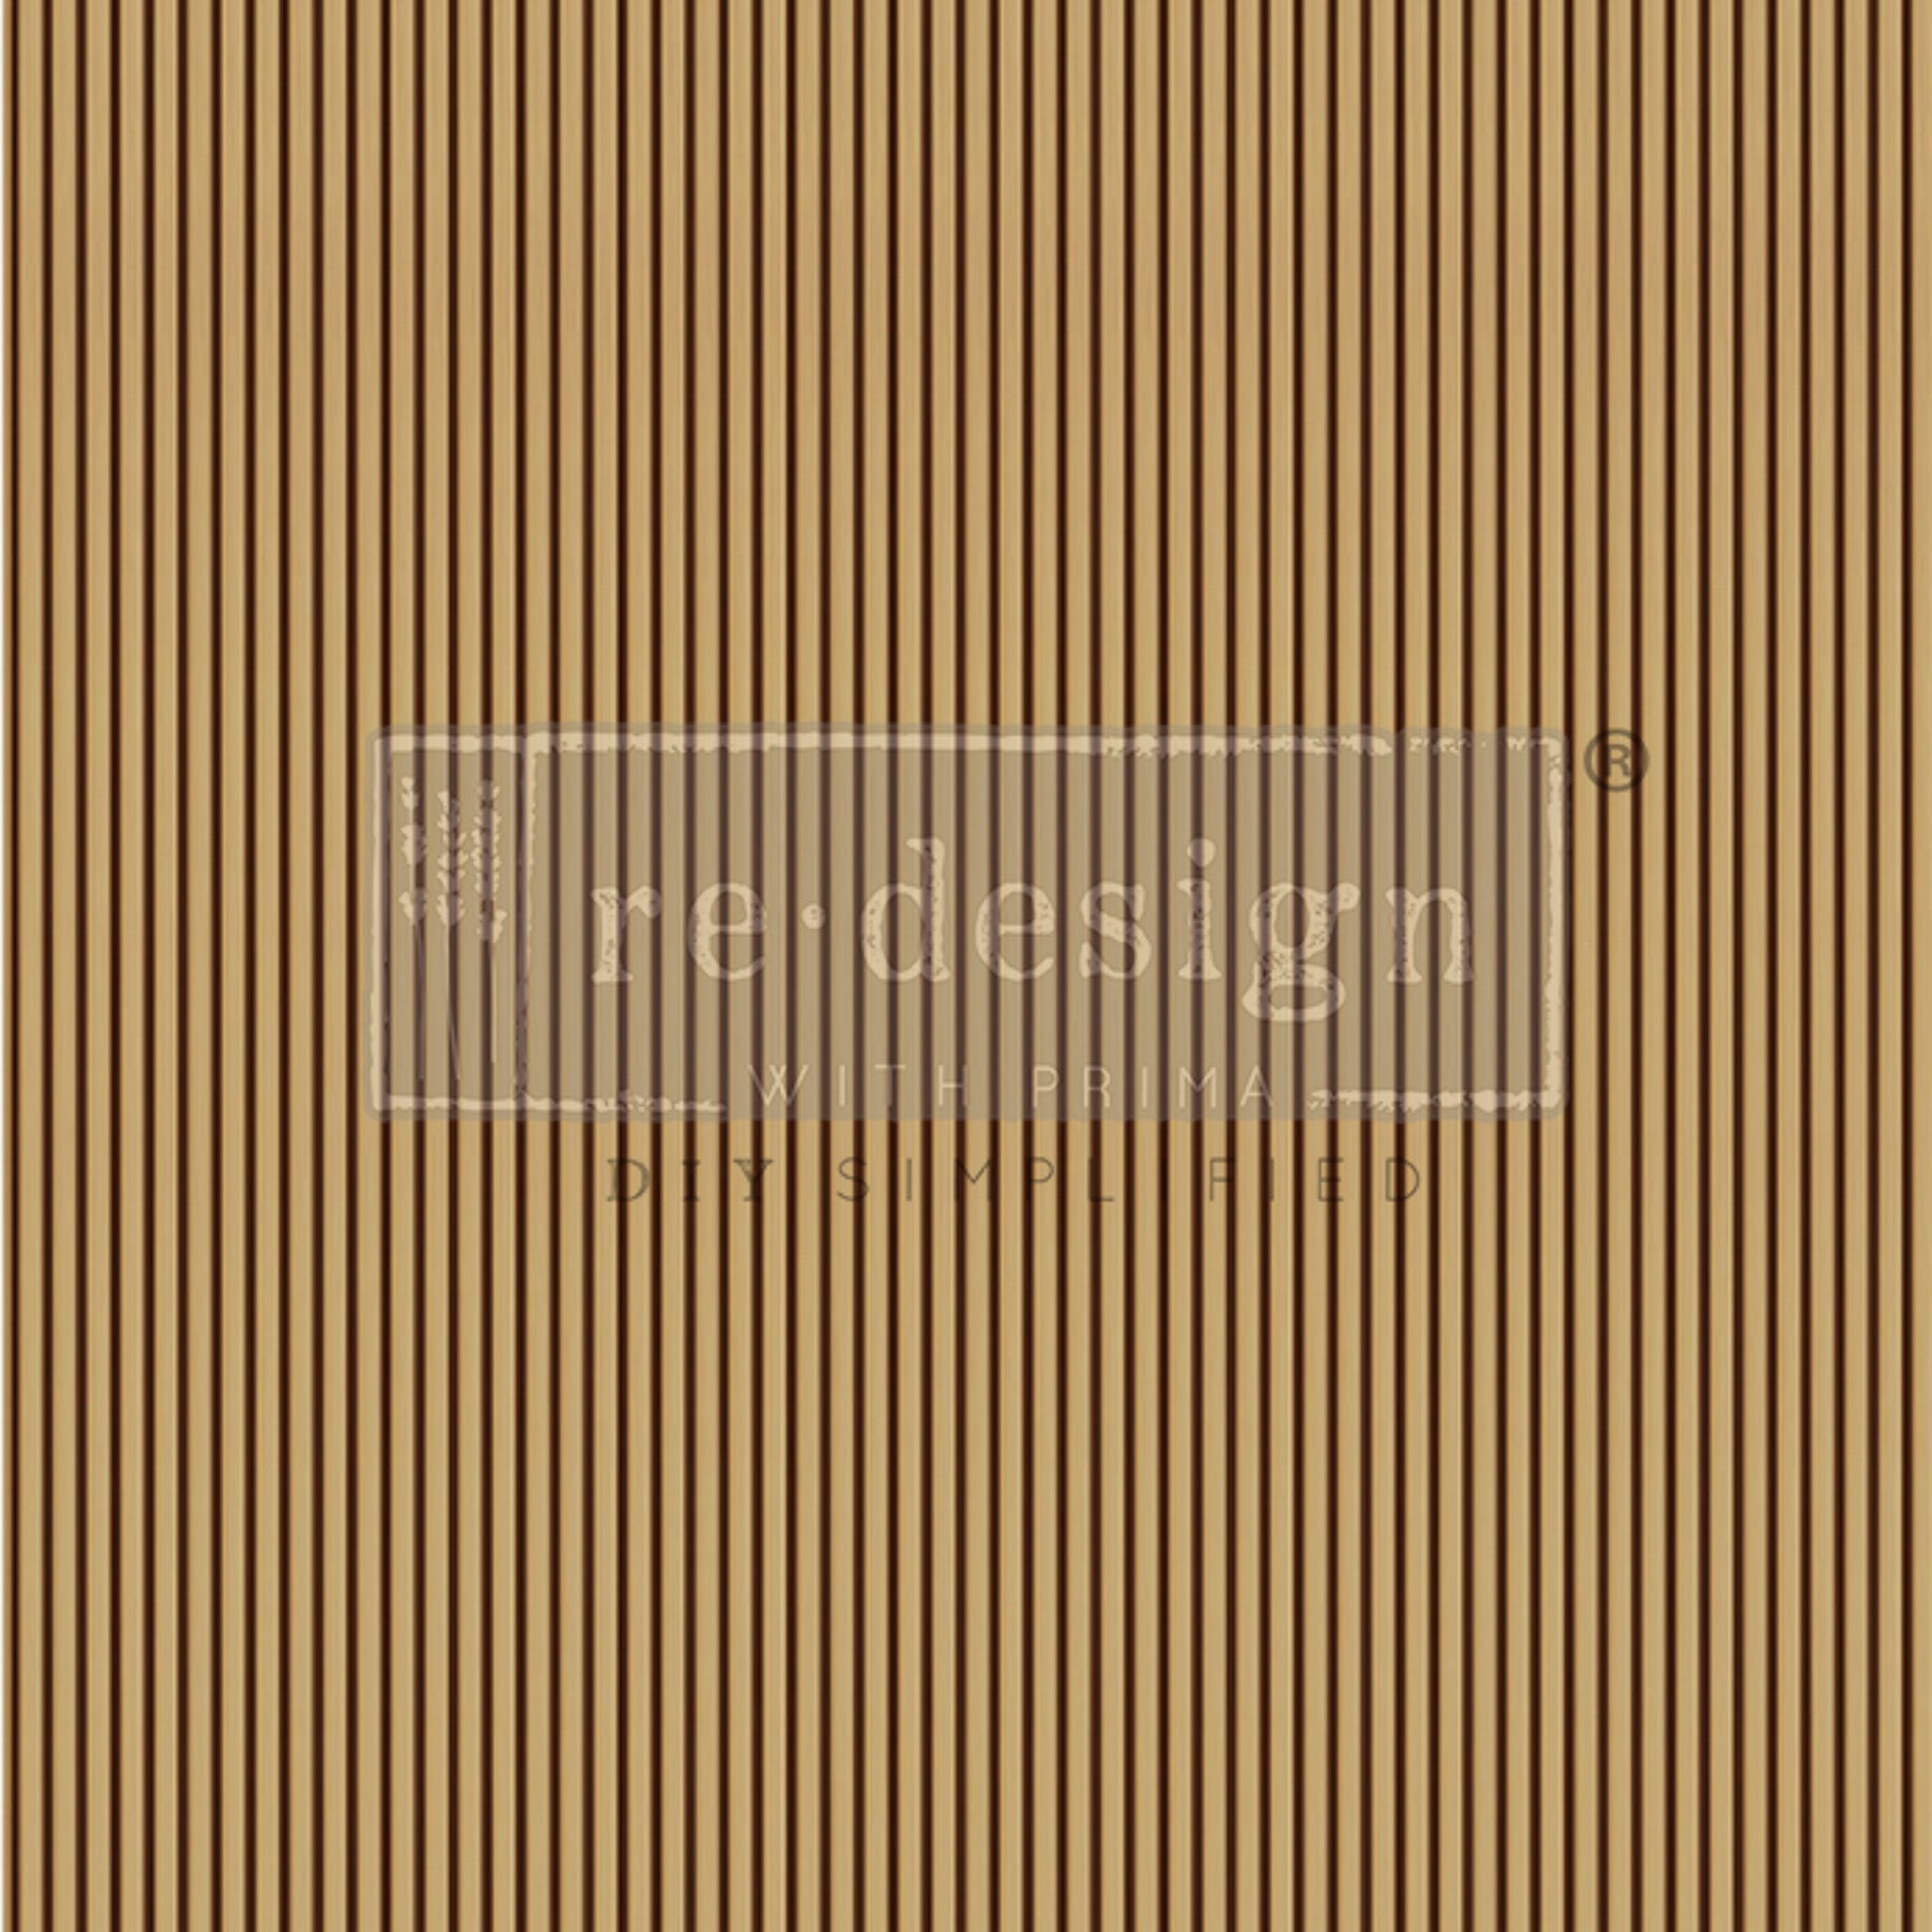 A1 fiber paper that features a repeating fine line design that resembles small slats of wood